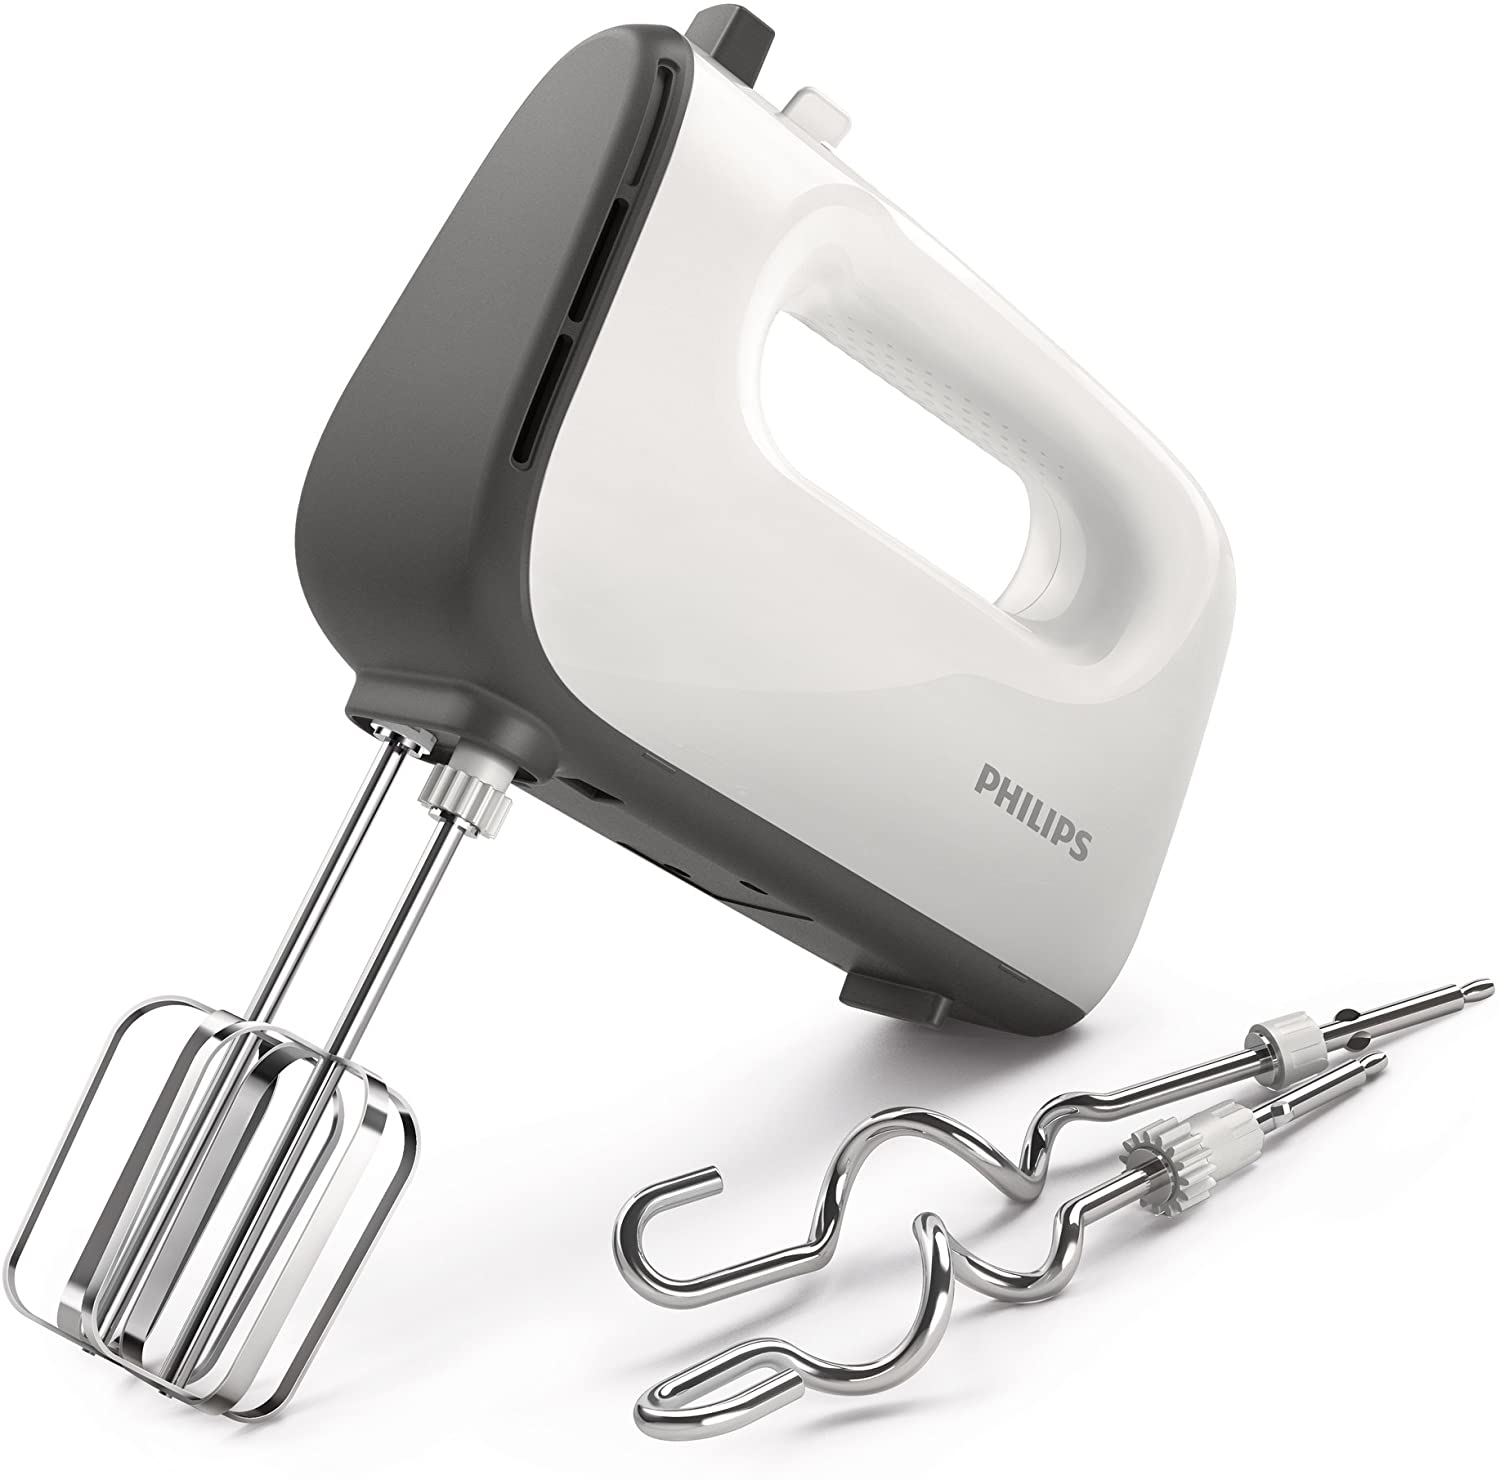 Philips Hand Blender - 450 W, 5 Speed Levels + Turbo Function, Conical Shaped Quirle, Dough Hook, Grey (HR3740/00)